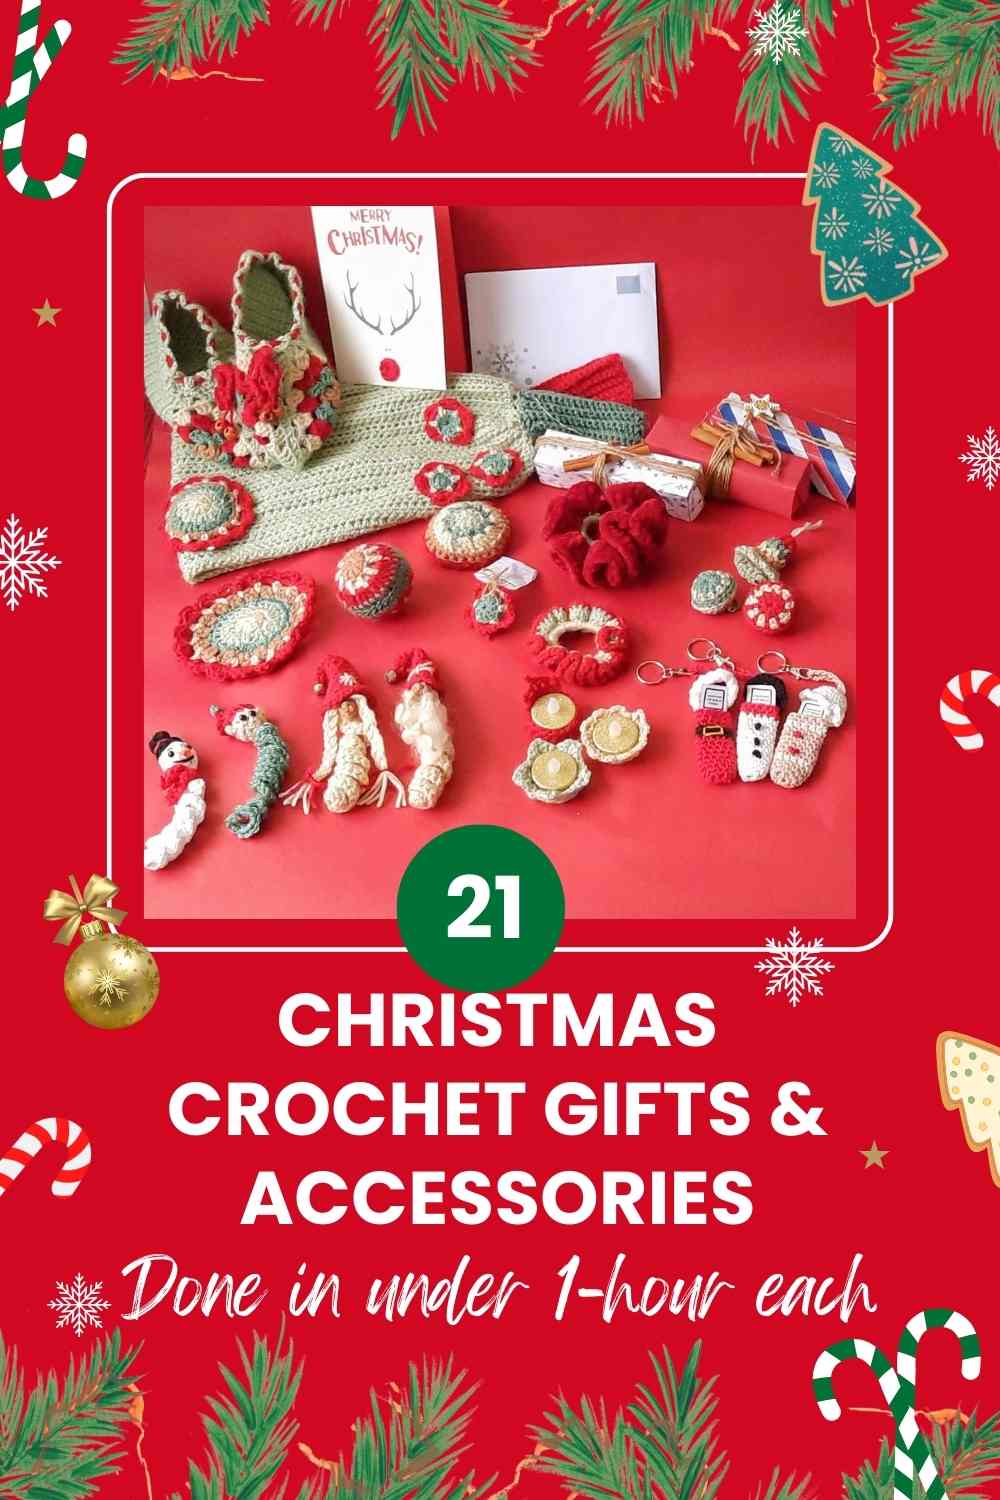 1-hour christmas crochet gifts & accessories